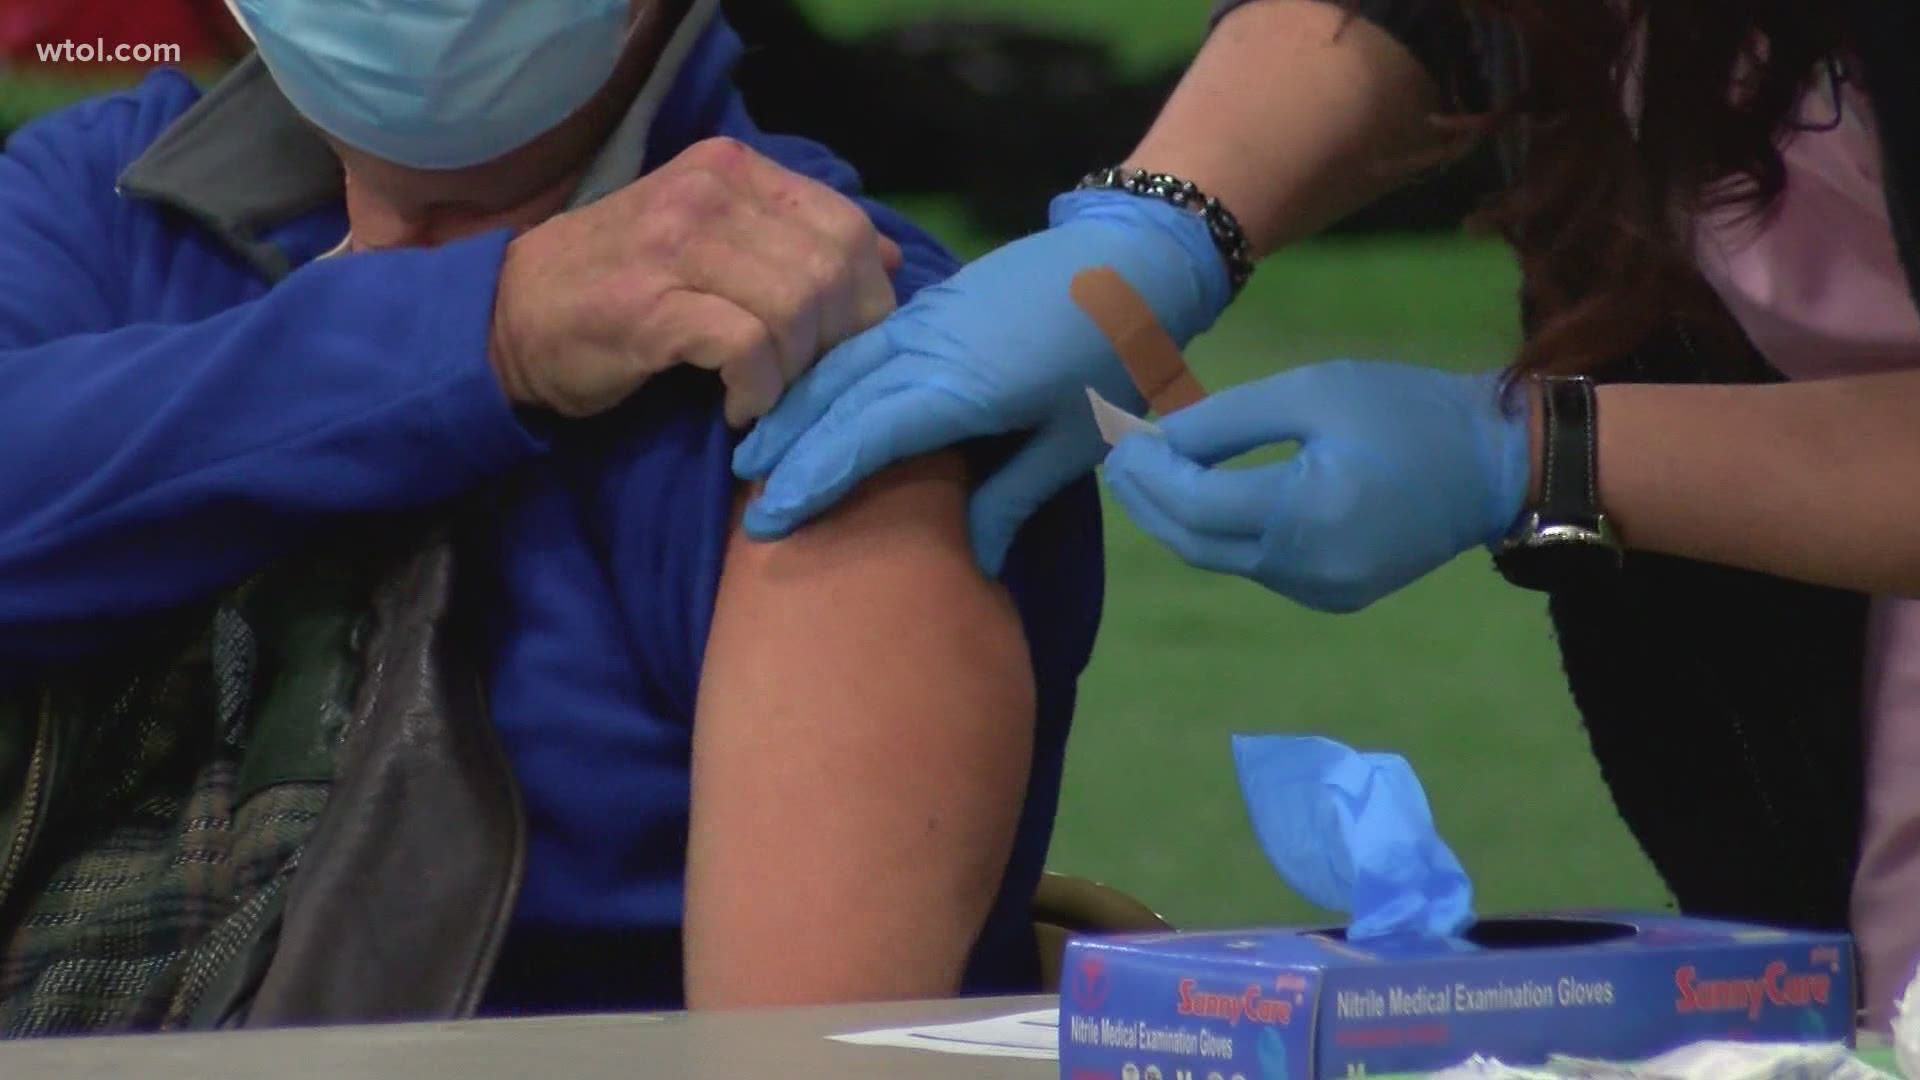 Leaders will discuss the library's new initiative at a news conference today, the same day that Walmart stores are added to the Lucas County vaccine provider list.